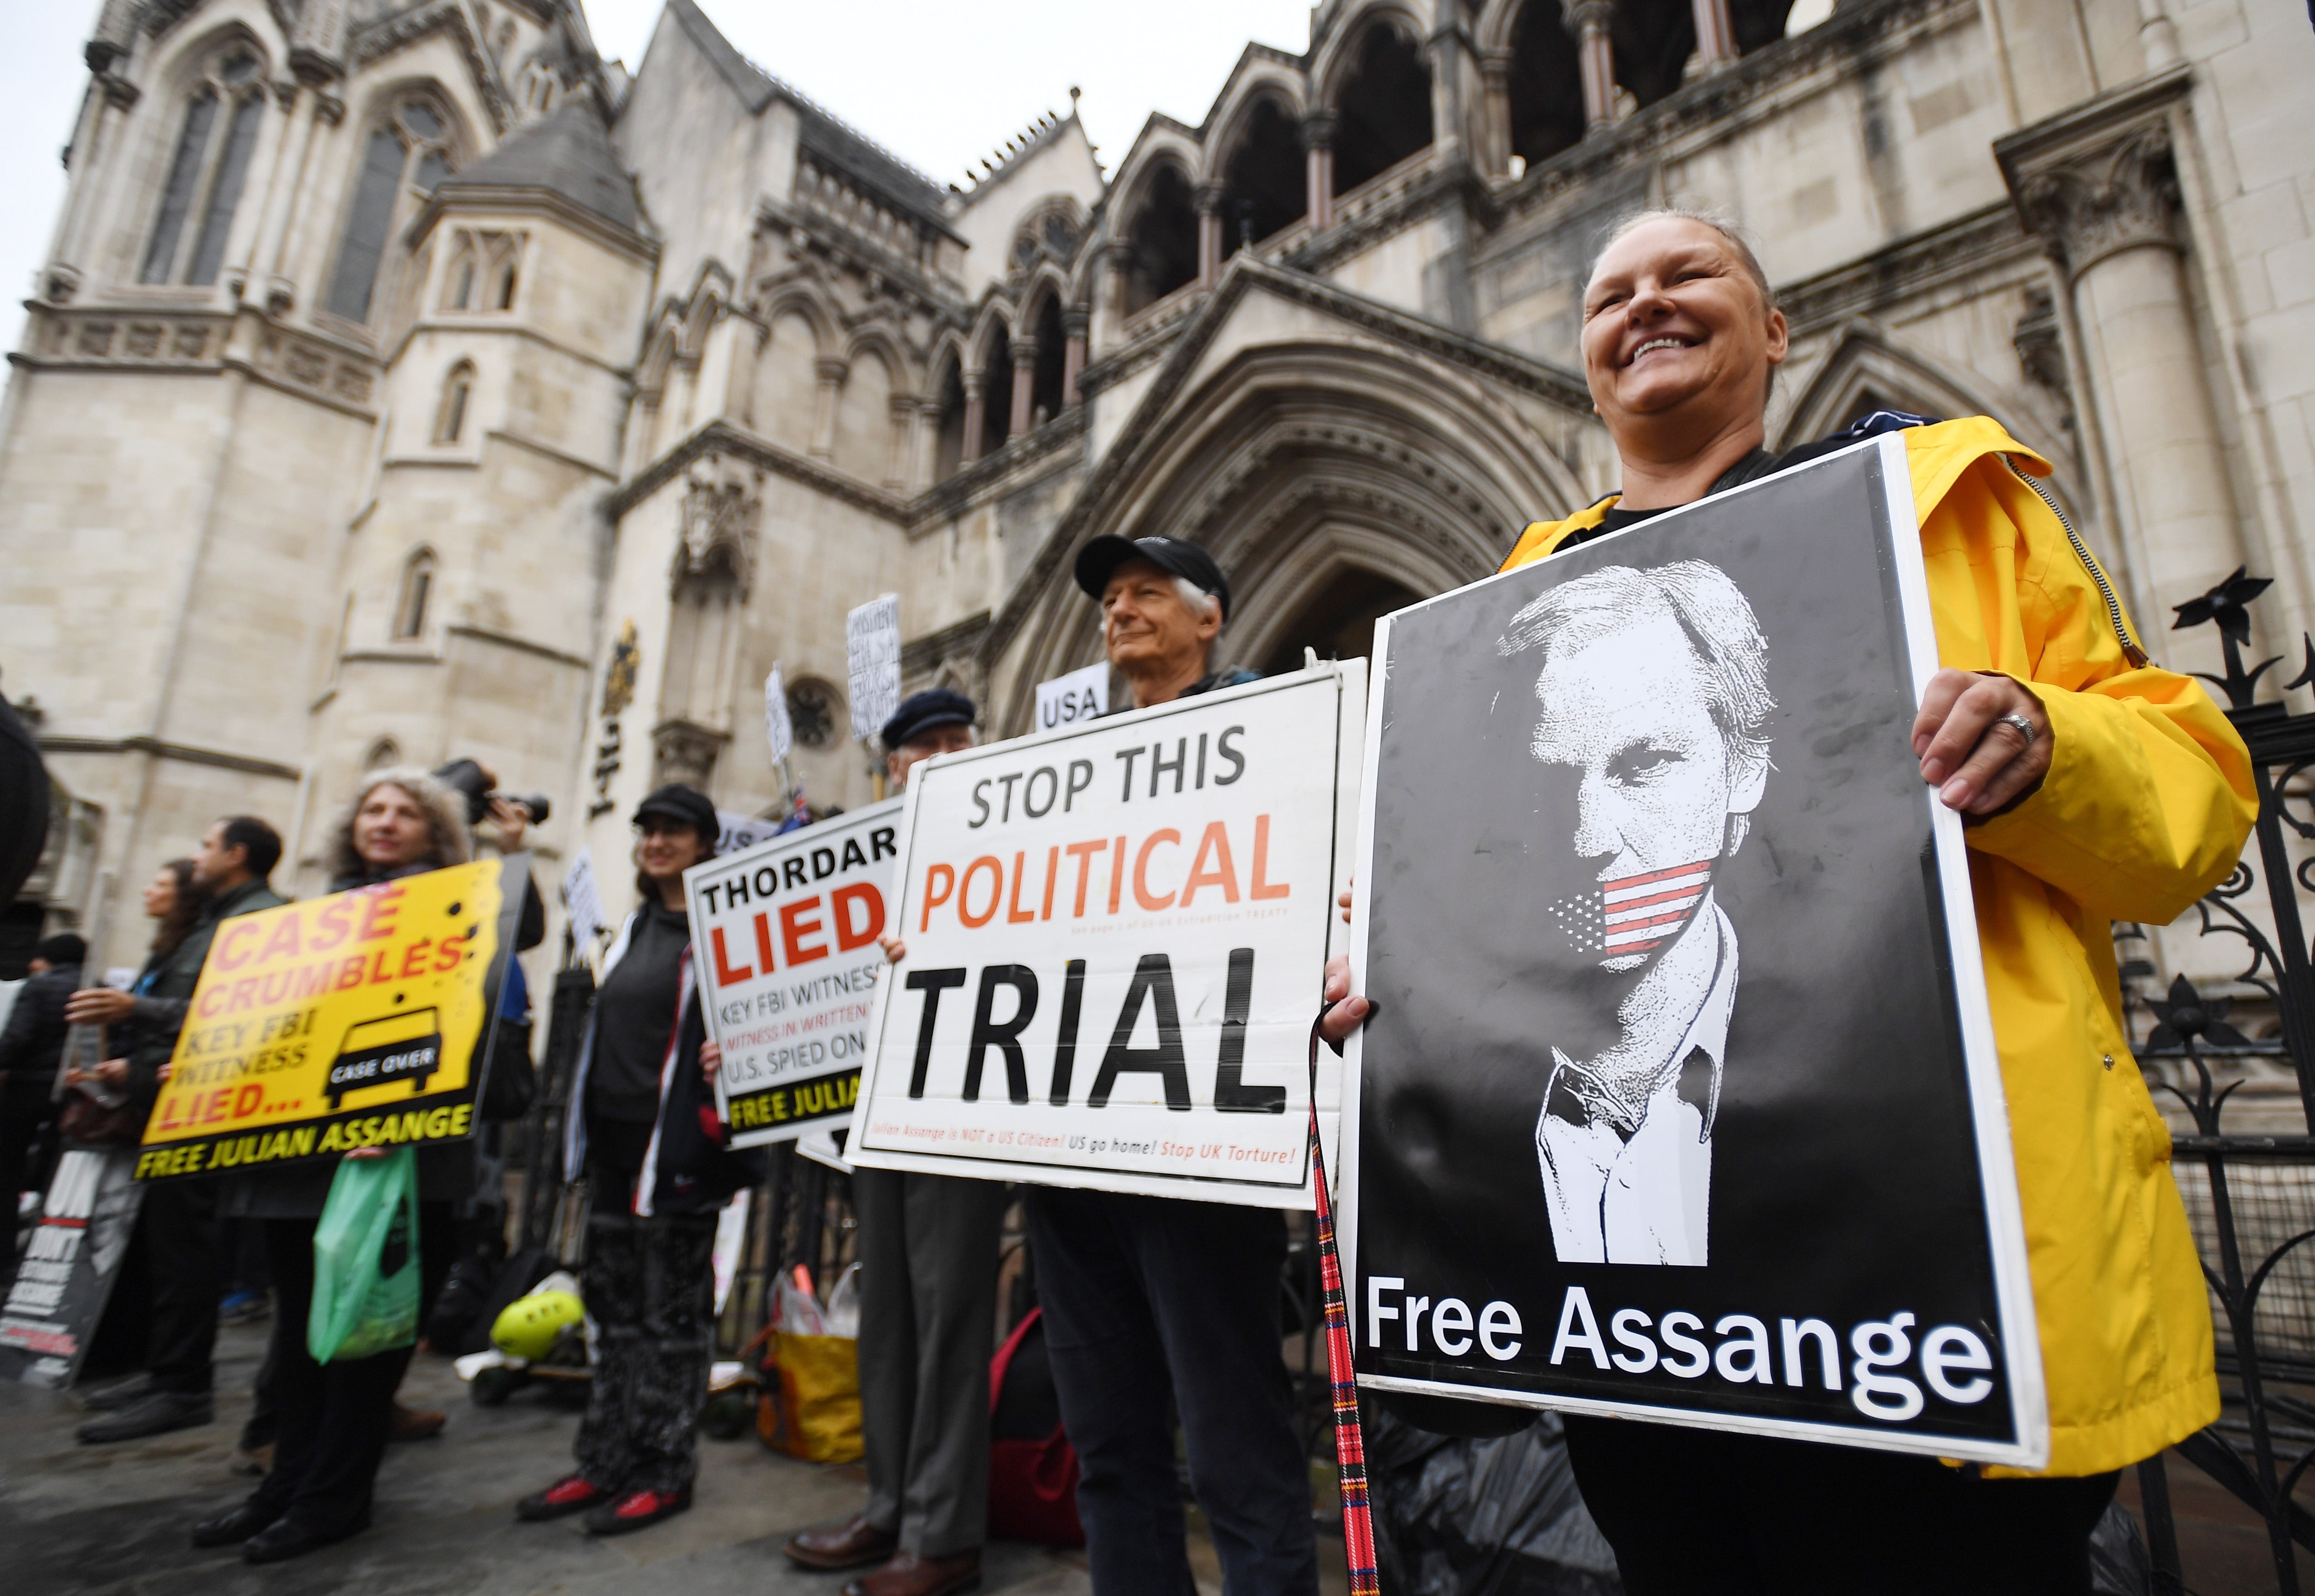 Supporters of Wikileaks founder Julian Assange demonstrate outside the Royal Courts of Justice in London